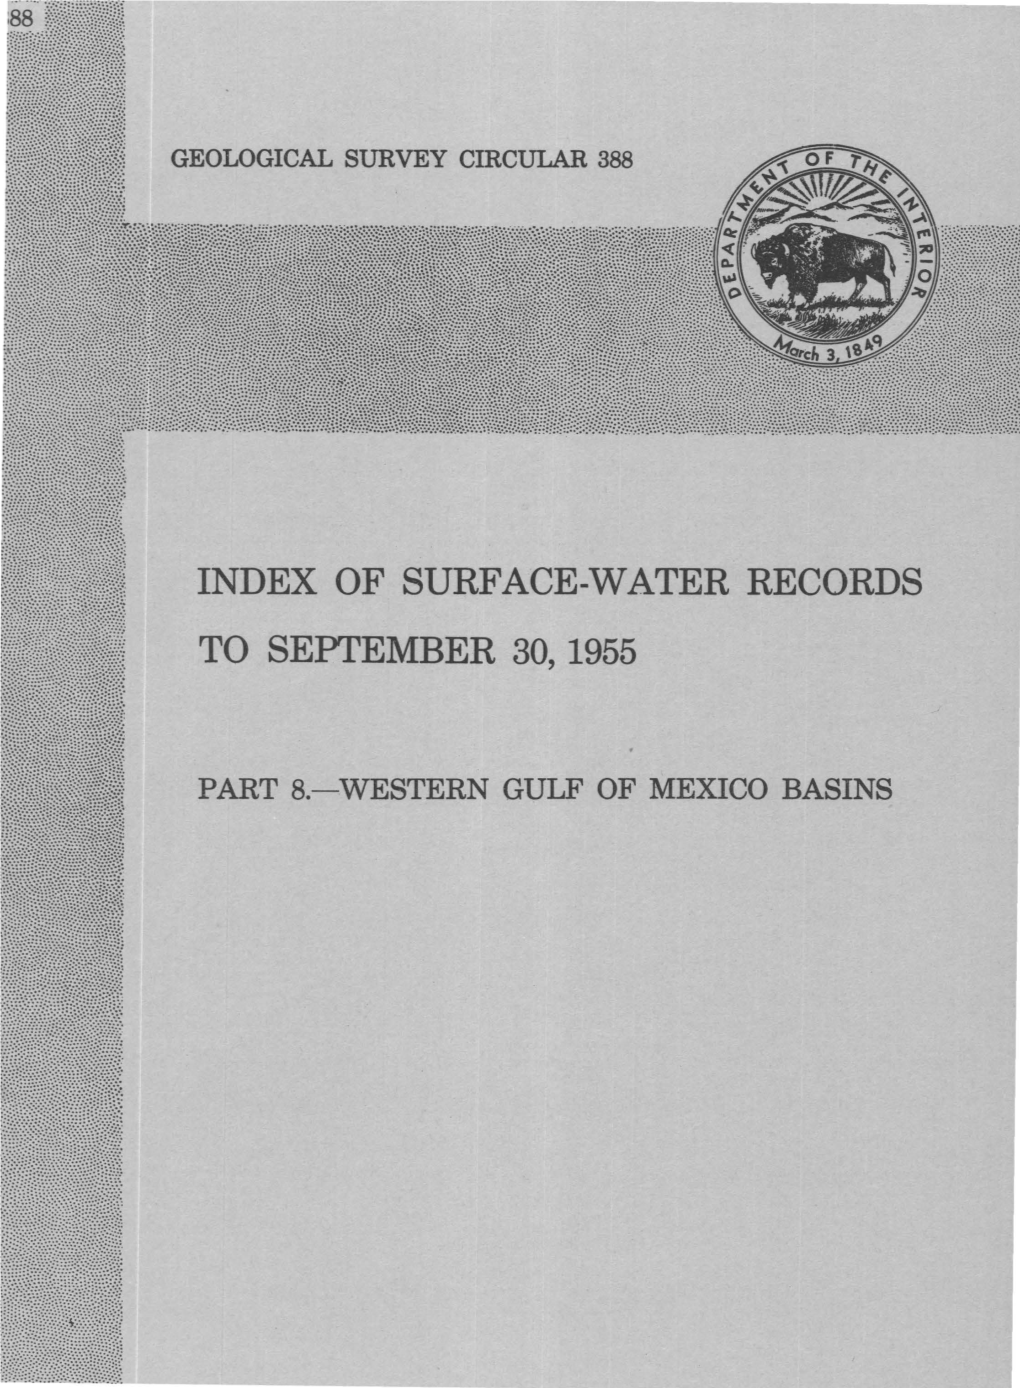 Of Surface-Water Records to September 30, 1955